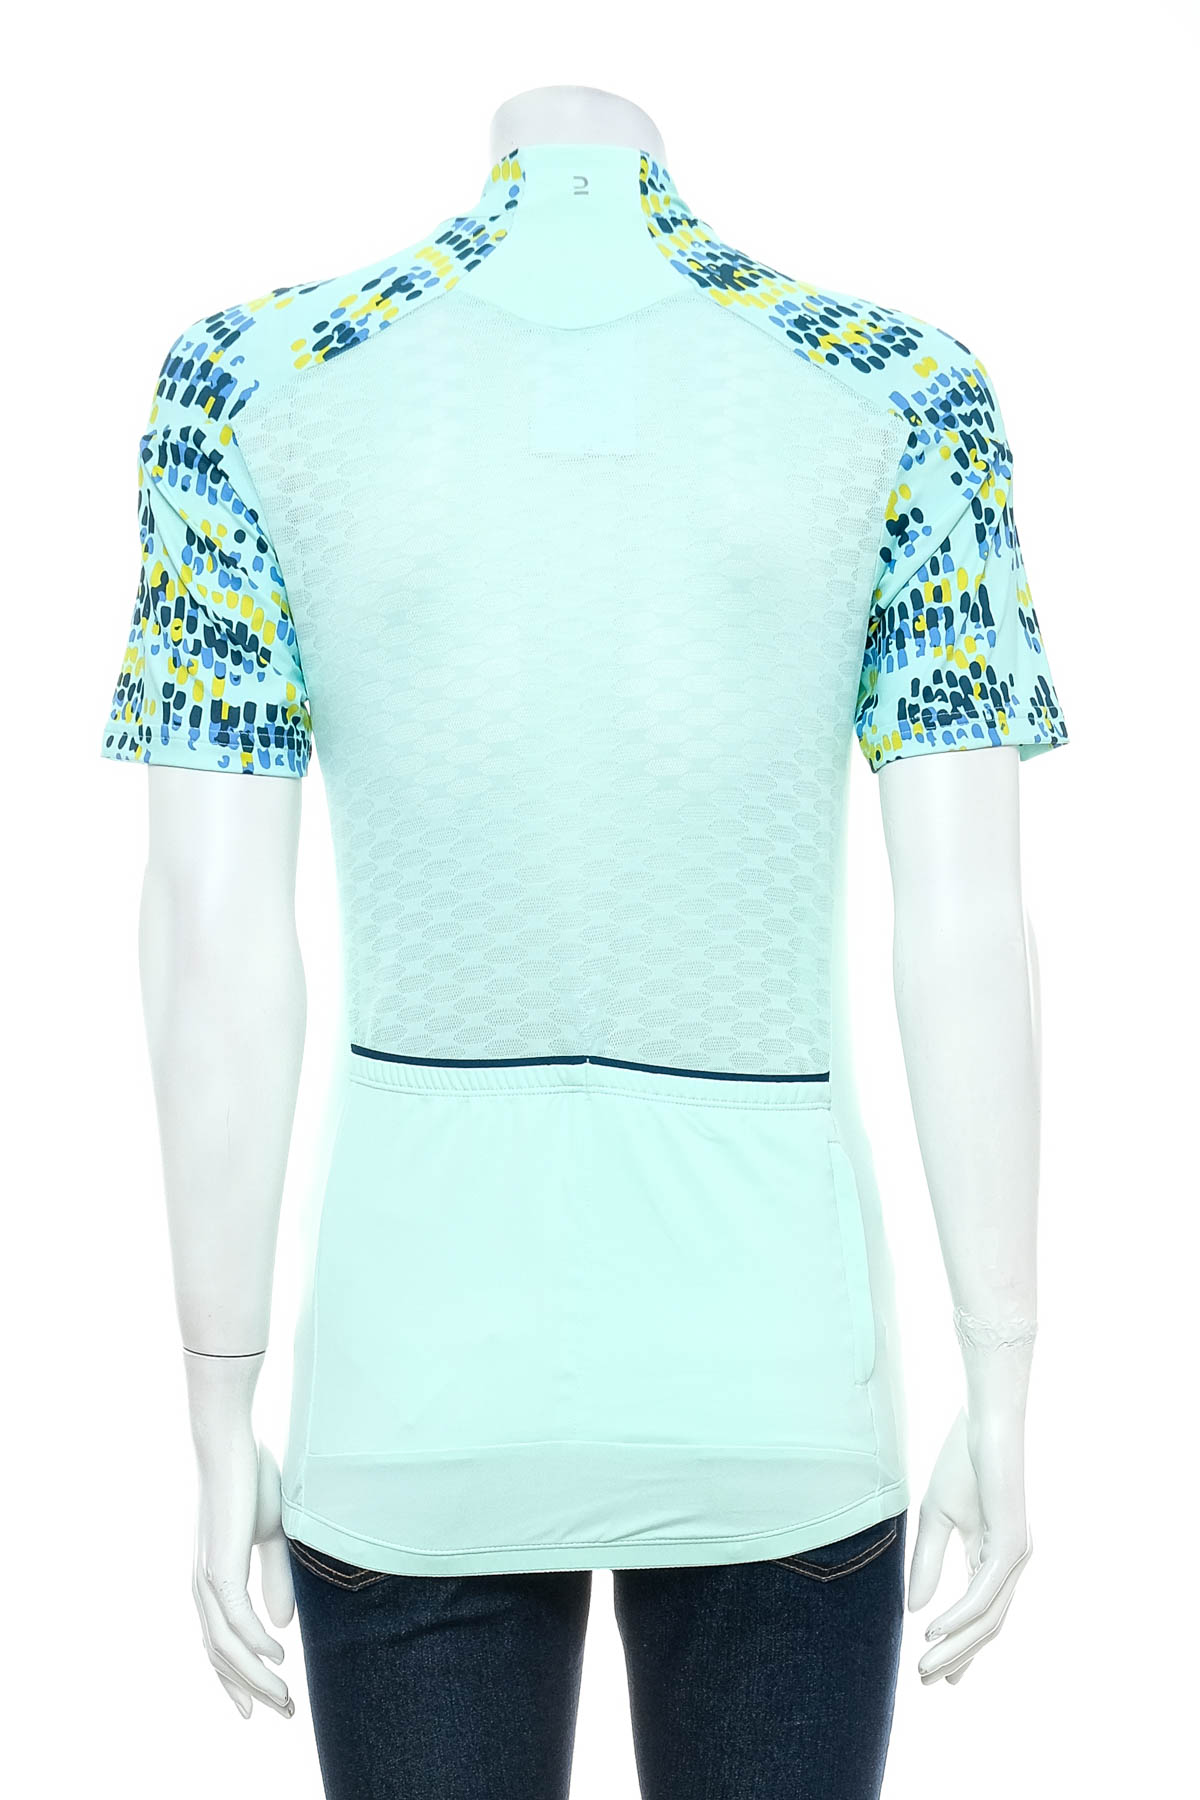 Female sports top for cycling - VAN RYSEL - 1